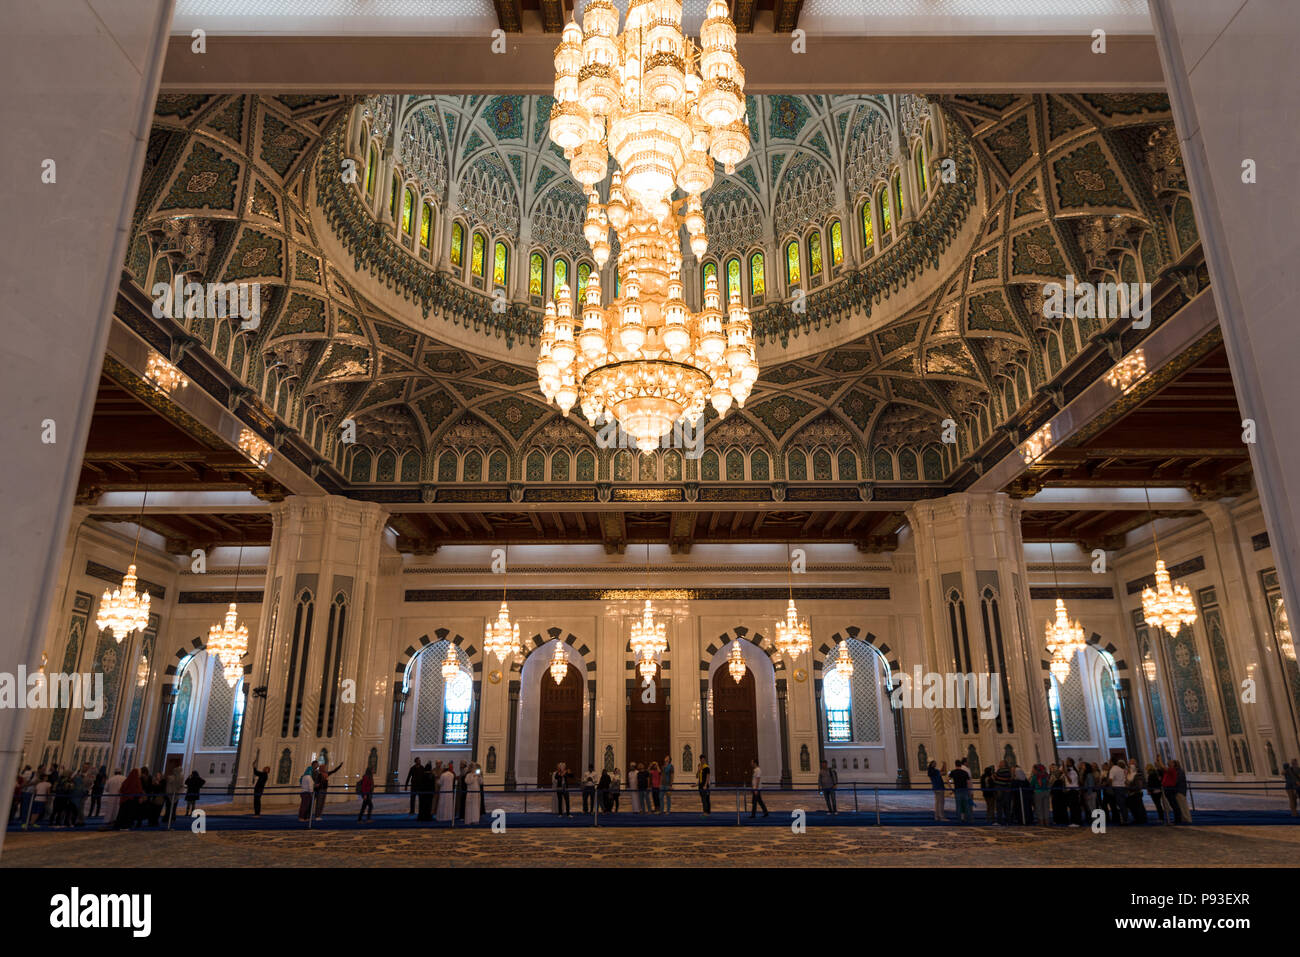 Main prayer hall of Sultan Qaboos Grand Mosque in Muscat, Oman.  Visitors to the mosque are clearly visible Stock Photo